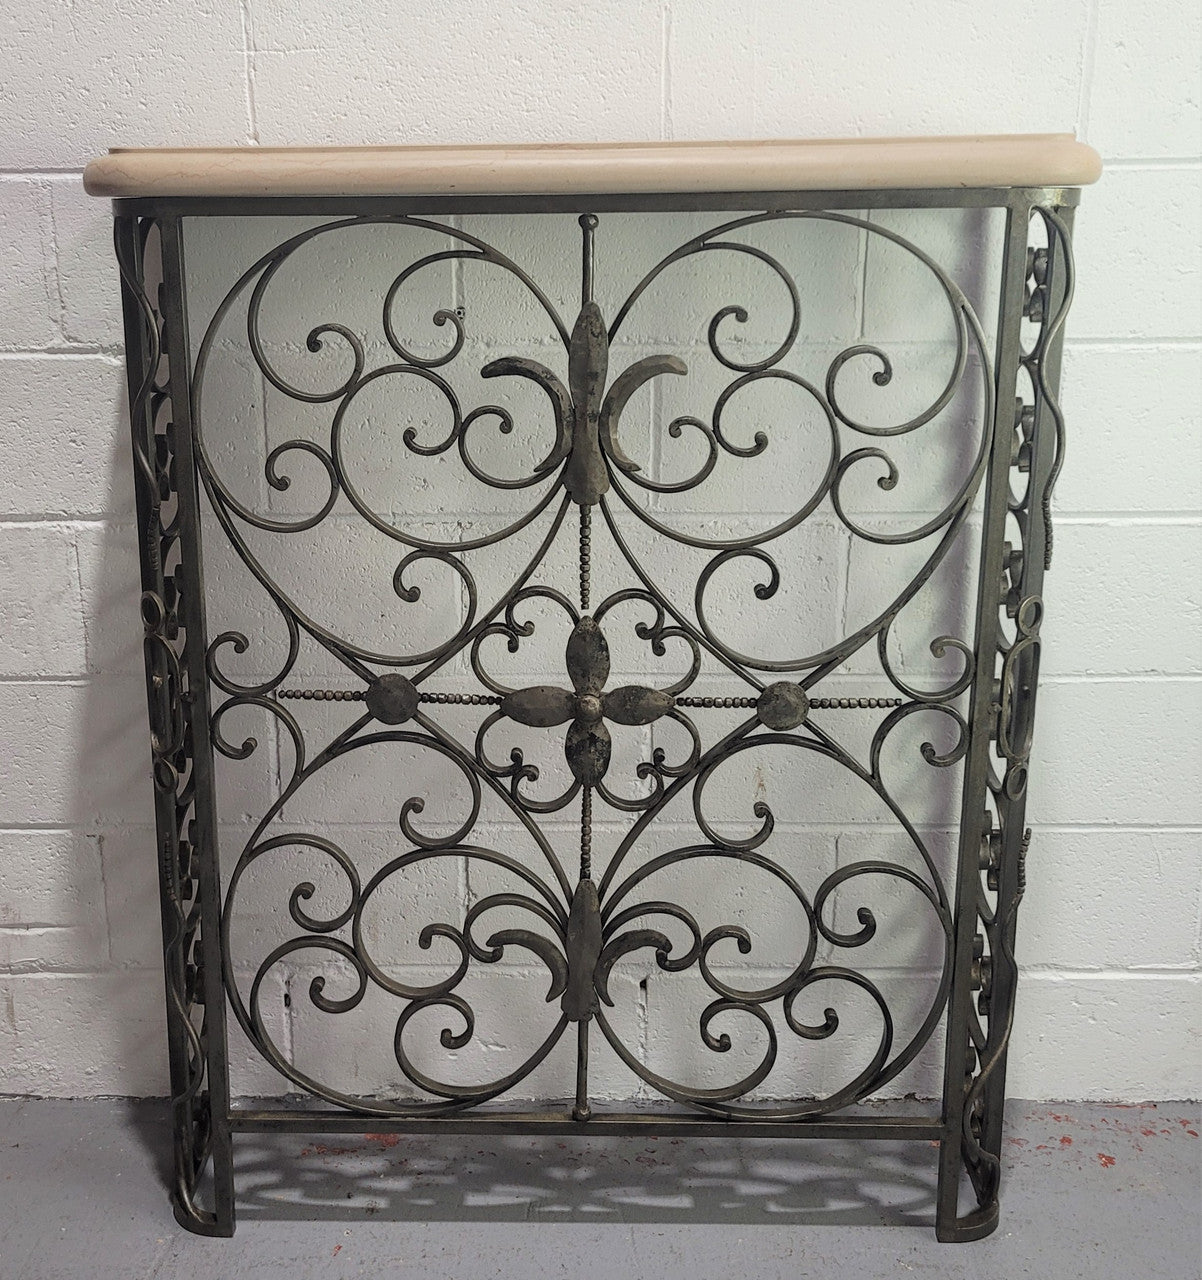 Stunning Art Deco wrought iron and marble top console table. It has amazing decorative iron work at the bottom and a beautiful marble top. It is in good original detailed condition.